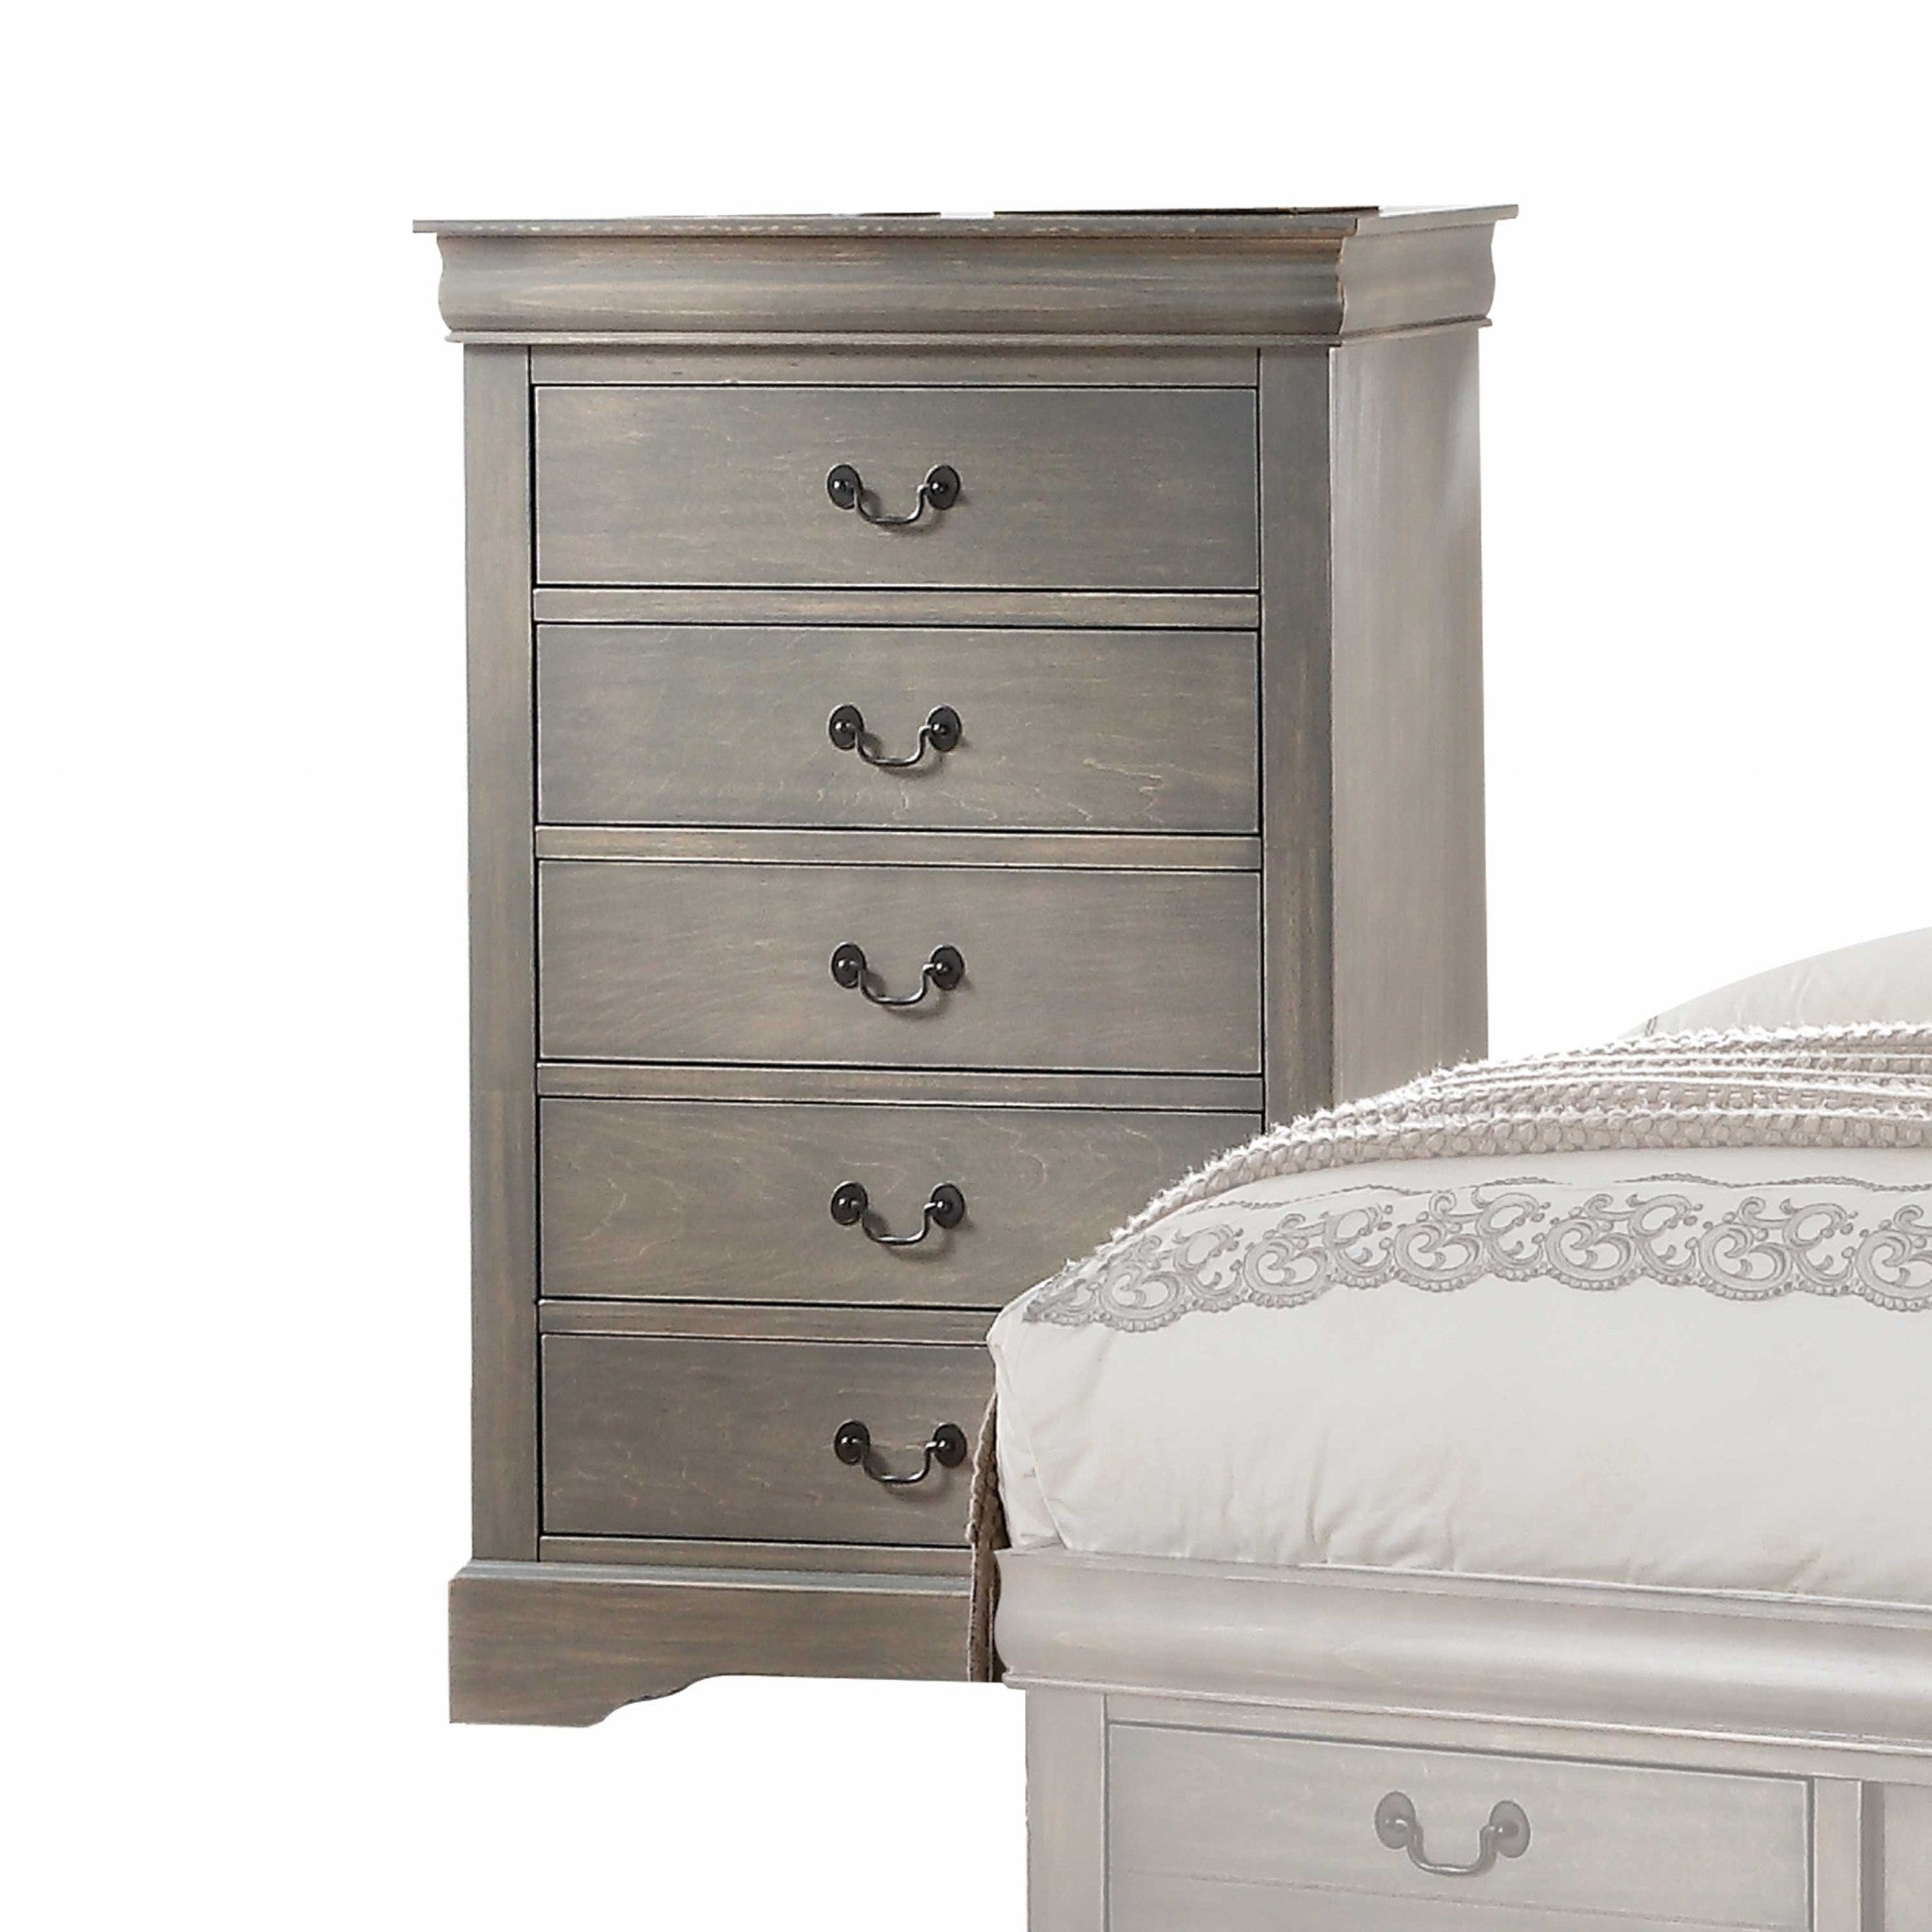 48" Antiqued Gray 5 Drawer Chest Dresse with Brushed Nickel Metal hardware Default Title